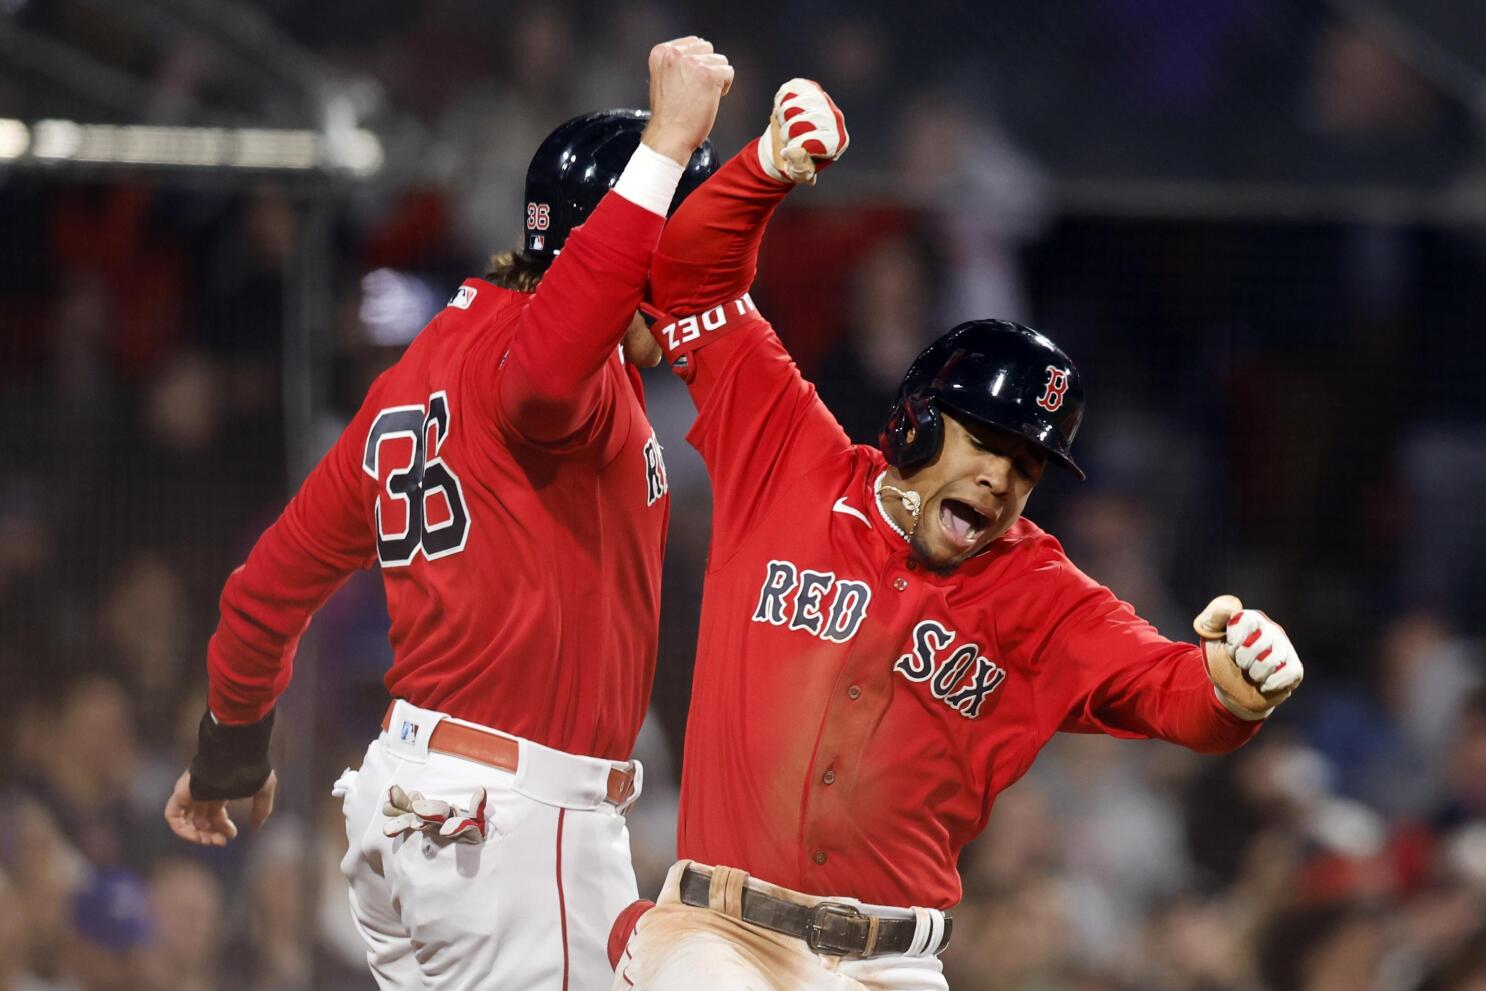 Red Sox edge Rays on walk-off home run in 13th - The Japan Times